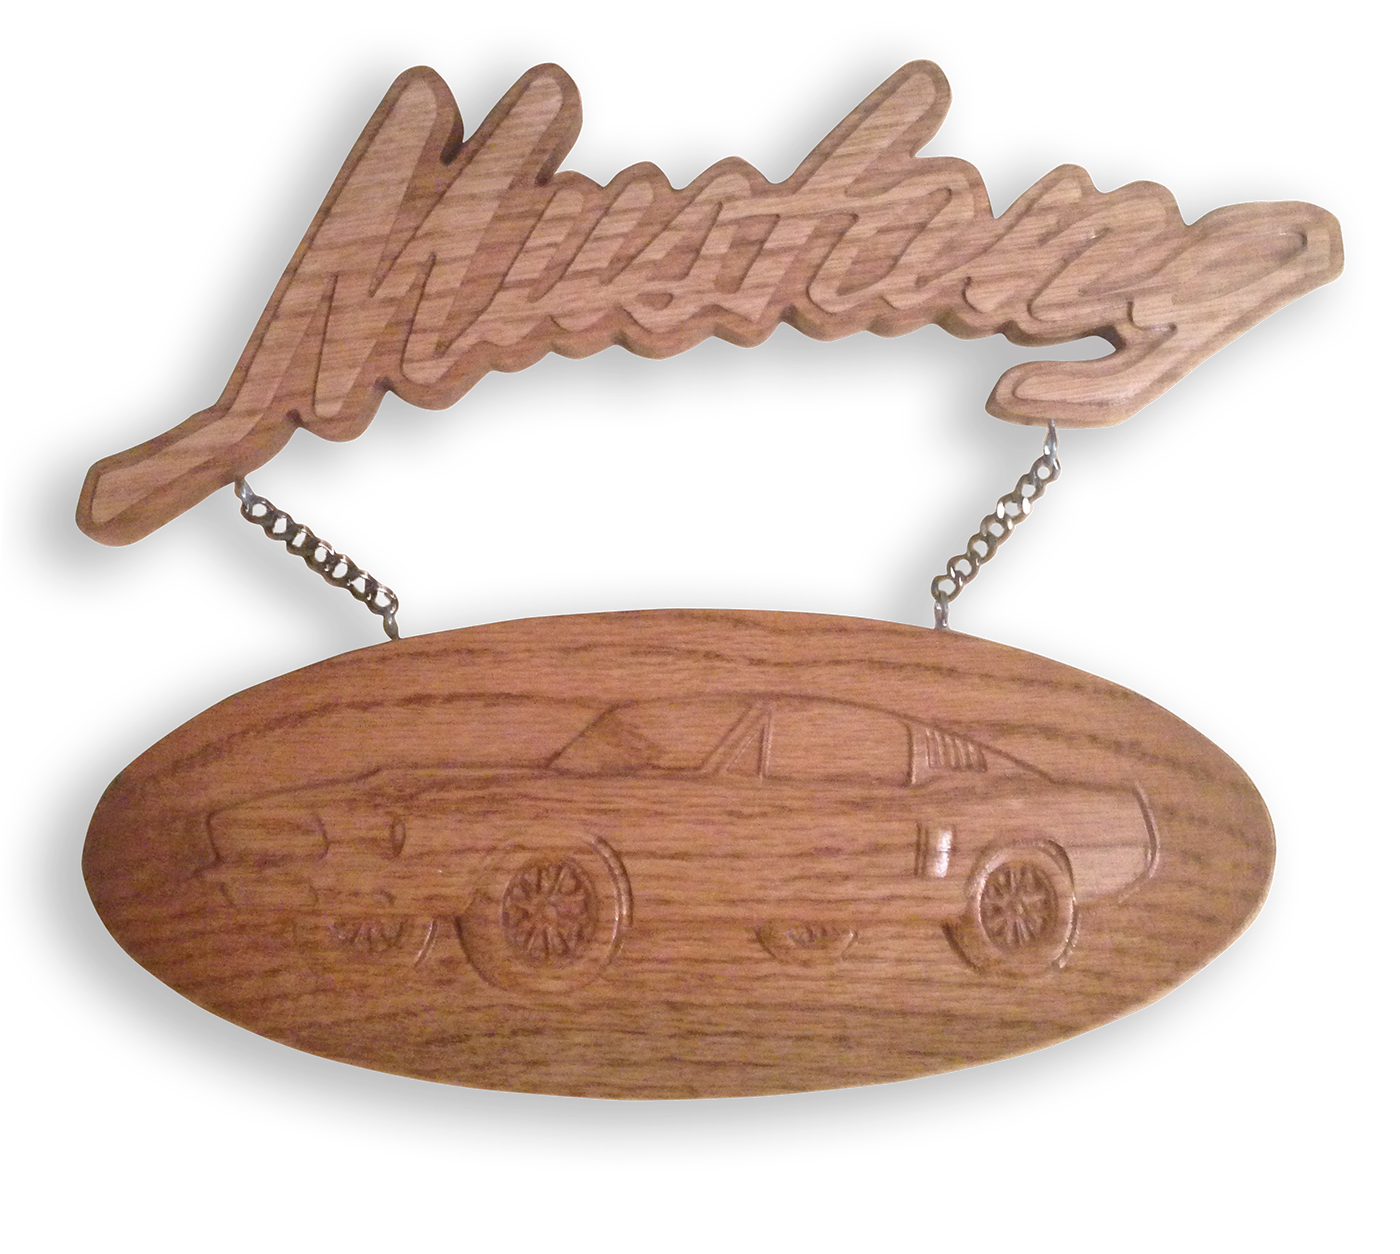 signs Cars wood carving engraving